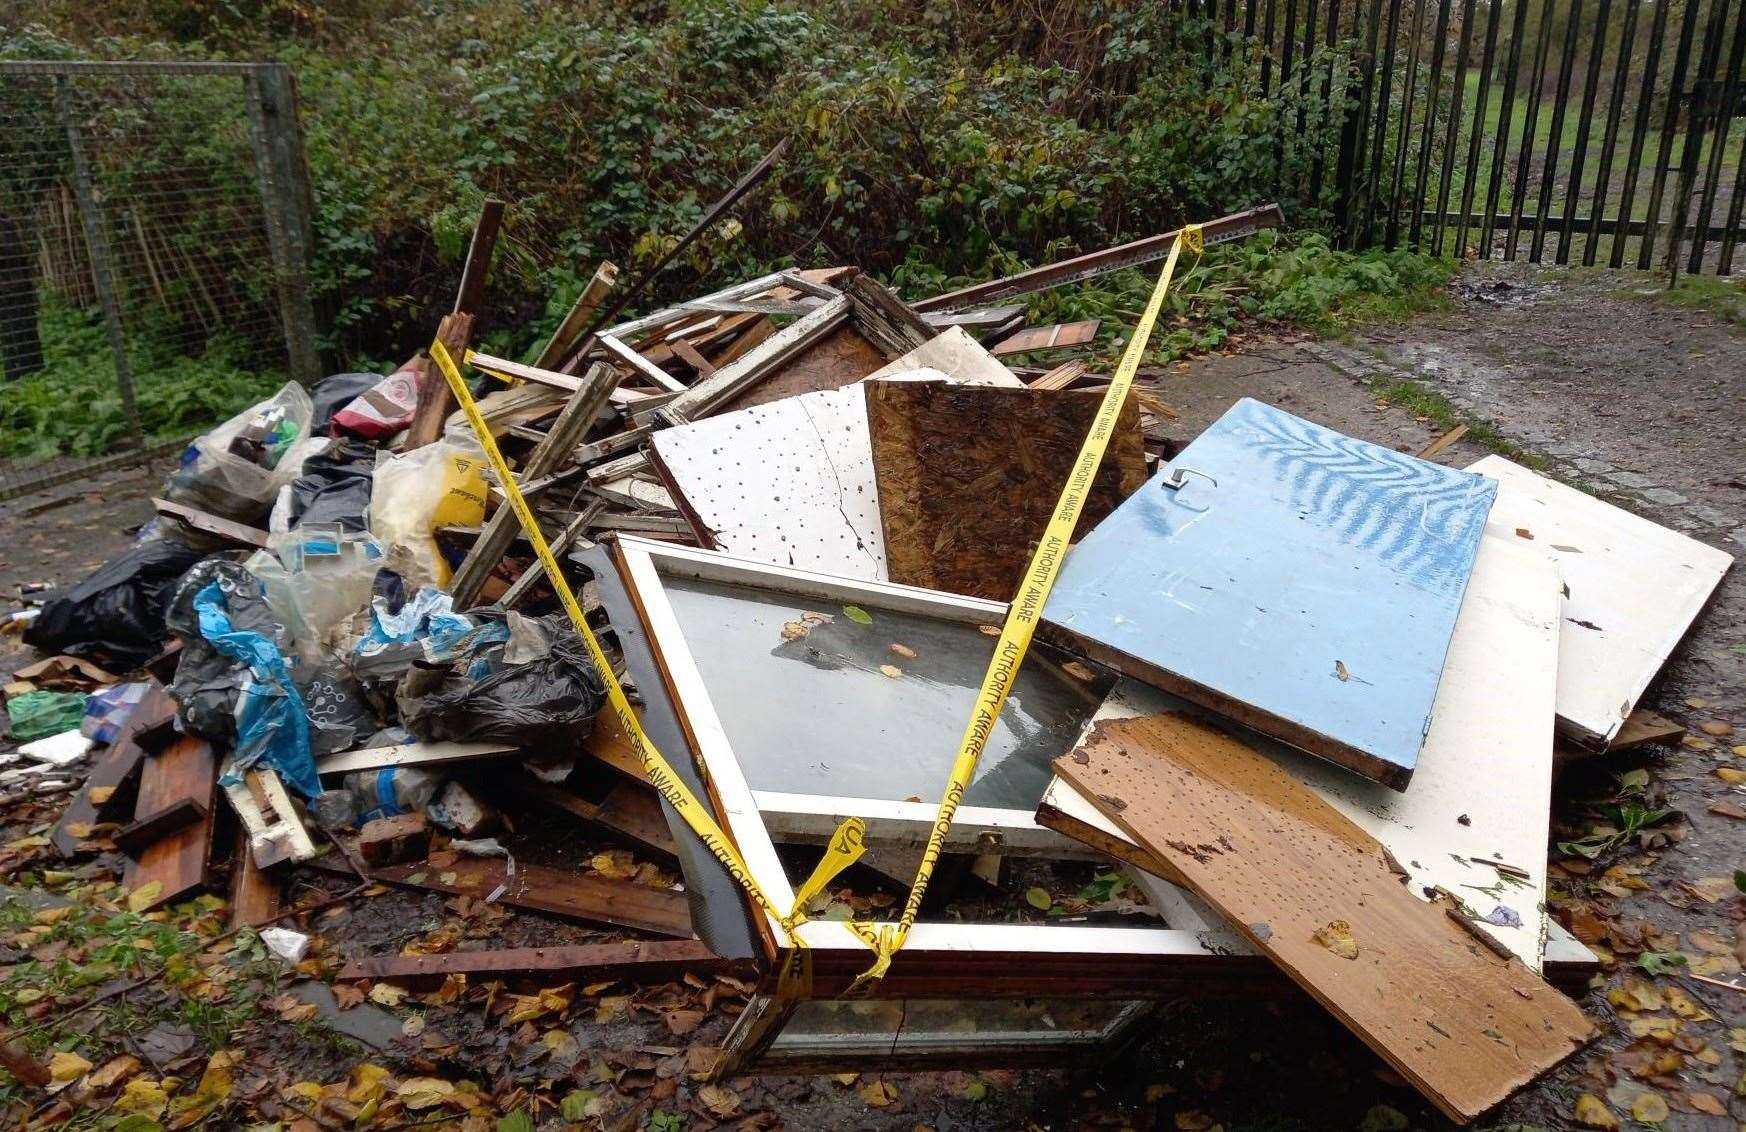 The fly-tipped rubbished dumped behind Norton Knatchbull School in Ashford. Picture: Ashford Borough Council